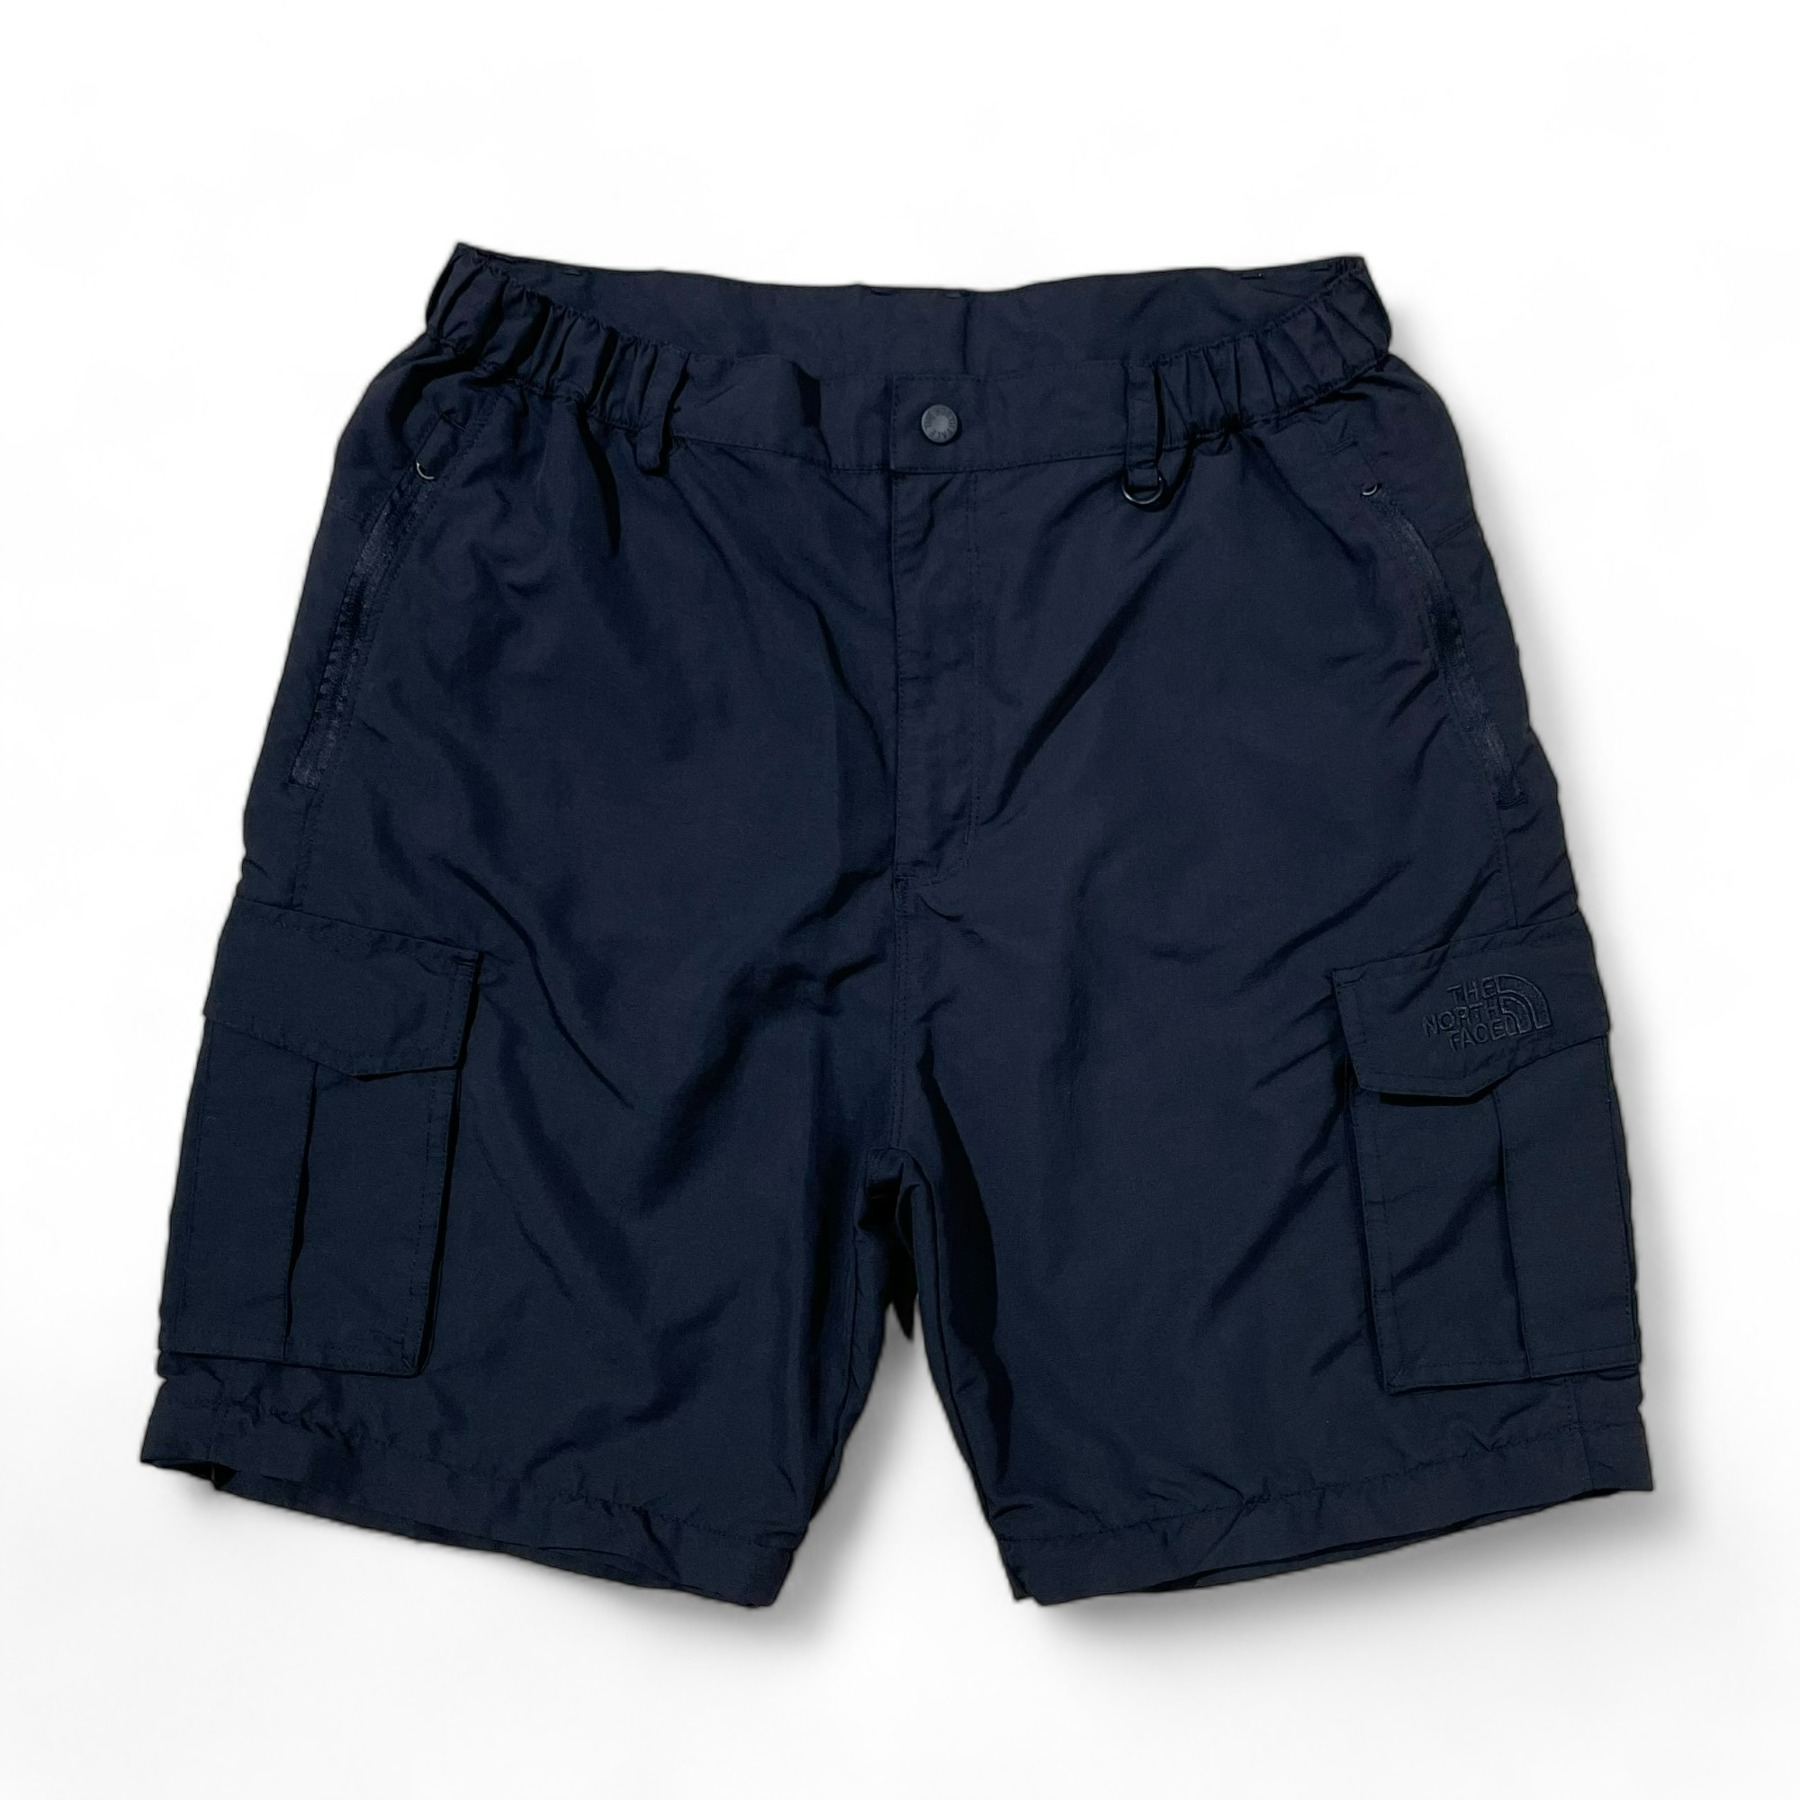 TNF Summit Series Shorts - 30 to 35inch